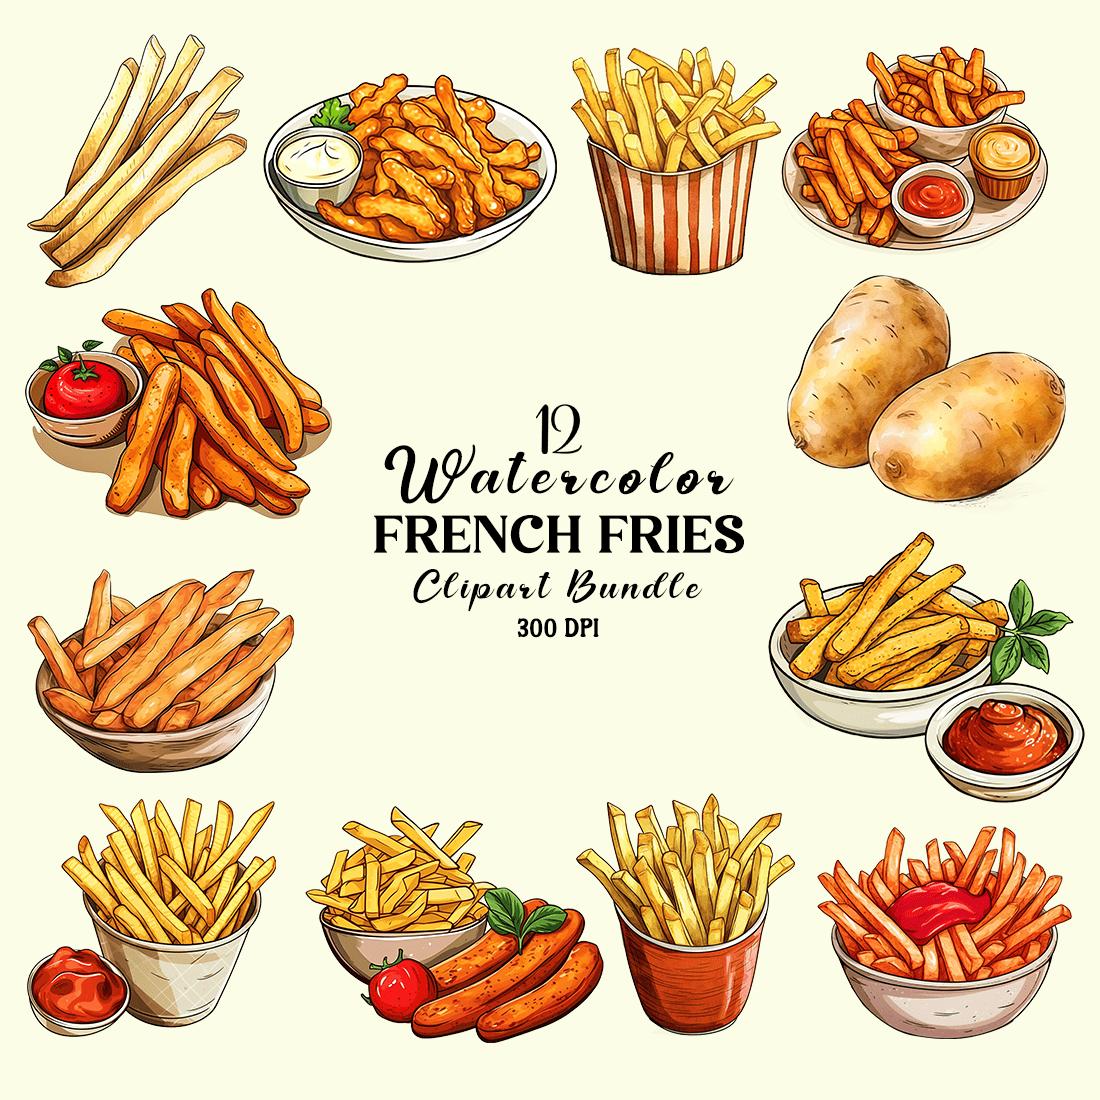 Watercolor French Fries Clipart Bundle cover image.